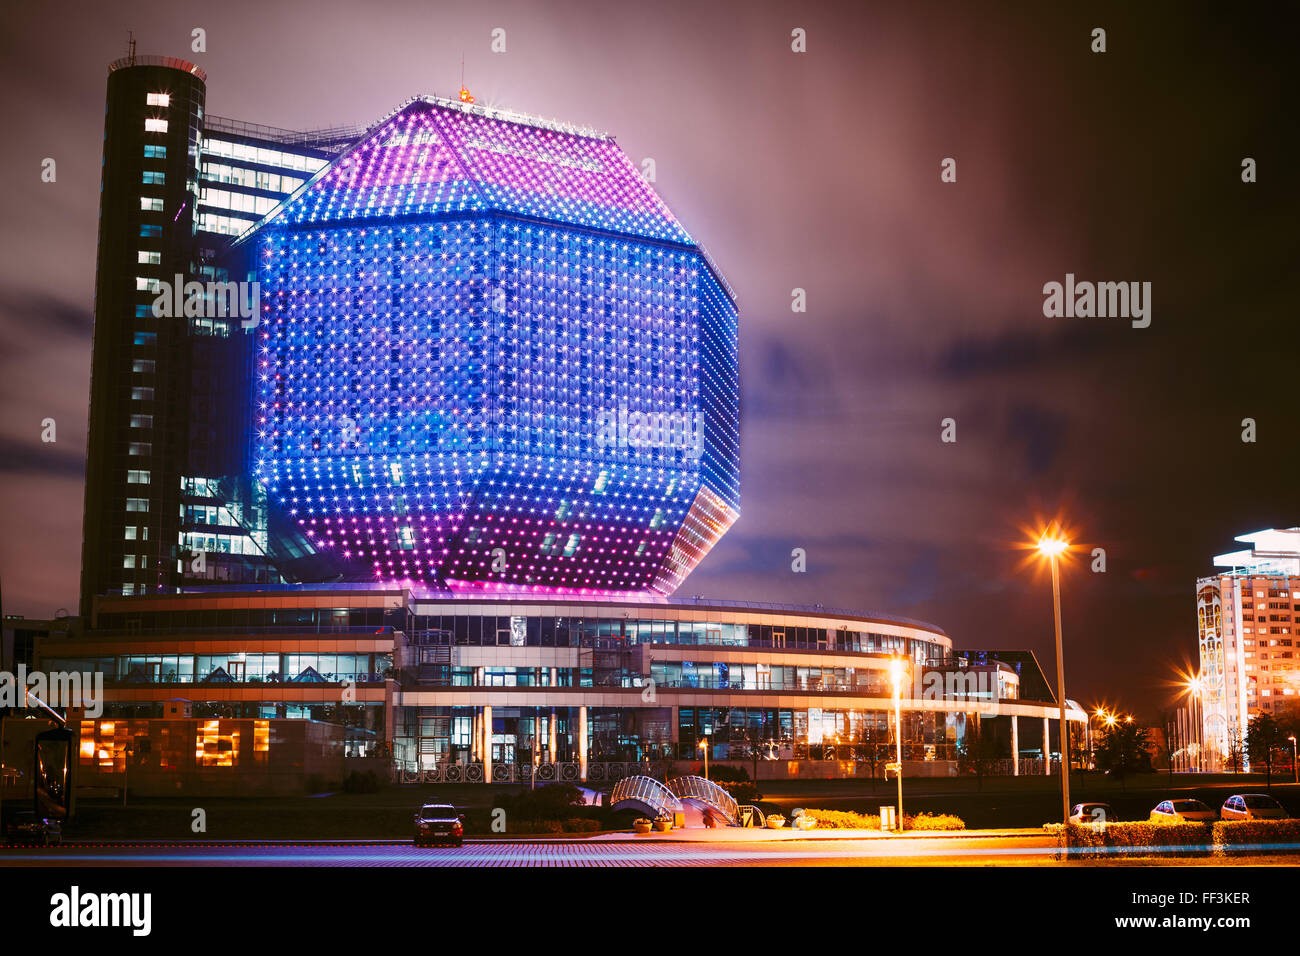 MINSK, BELARUS - JULY 19, 2014: Unique Building Of National Library Of Belarus In Minsk At Night Scene. Building Has 23 Floors A Stock Photo